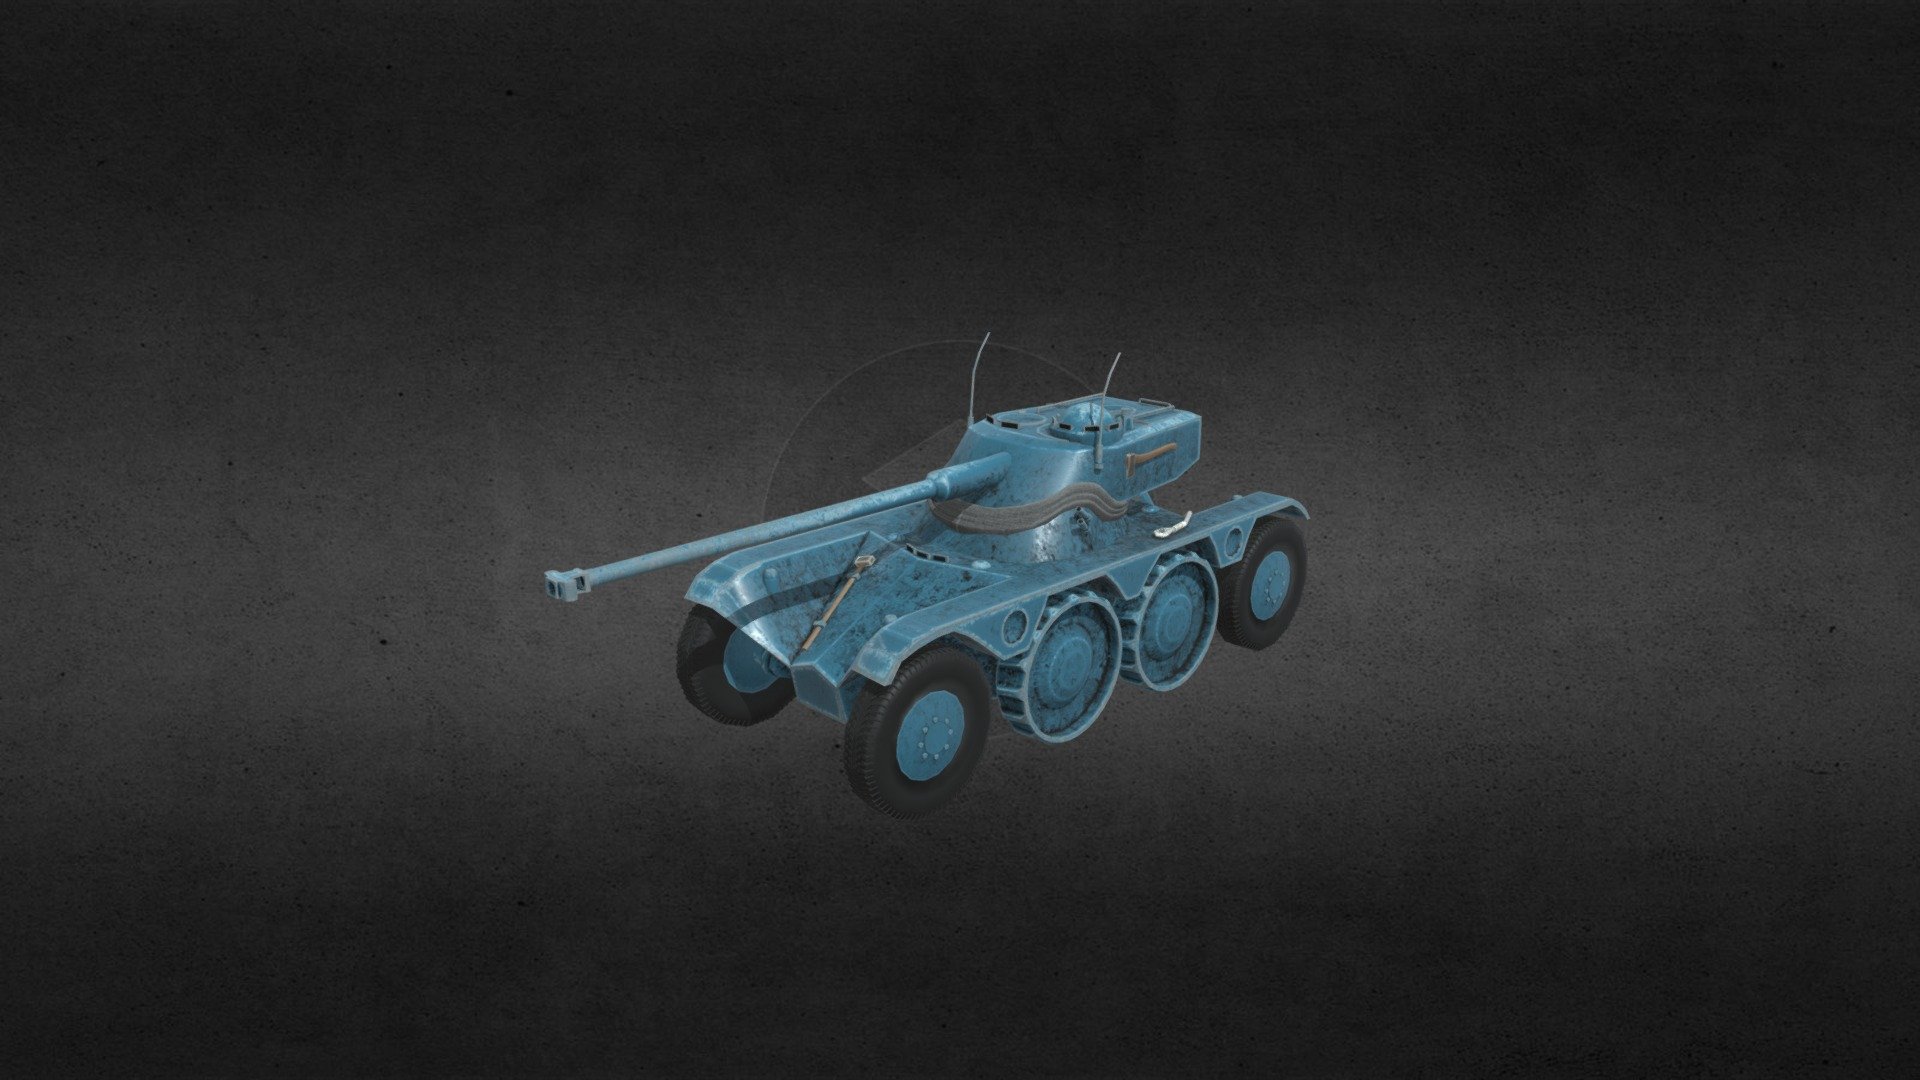 In 1954-1955, a number of Panhard EBR armored vehicles were fitted with the FL 10 turret from the AMX 13 75 tank in order to increase firepower. The shoulder strap of the standard tower was similar, so there were no structural changes to the body. The converted armored vehicles entered service with the French army 3d model